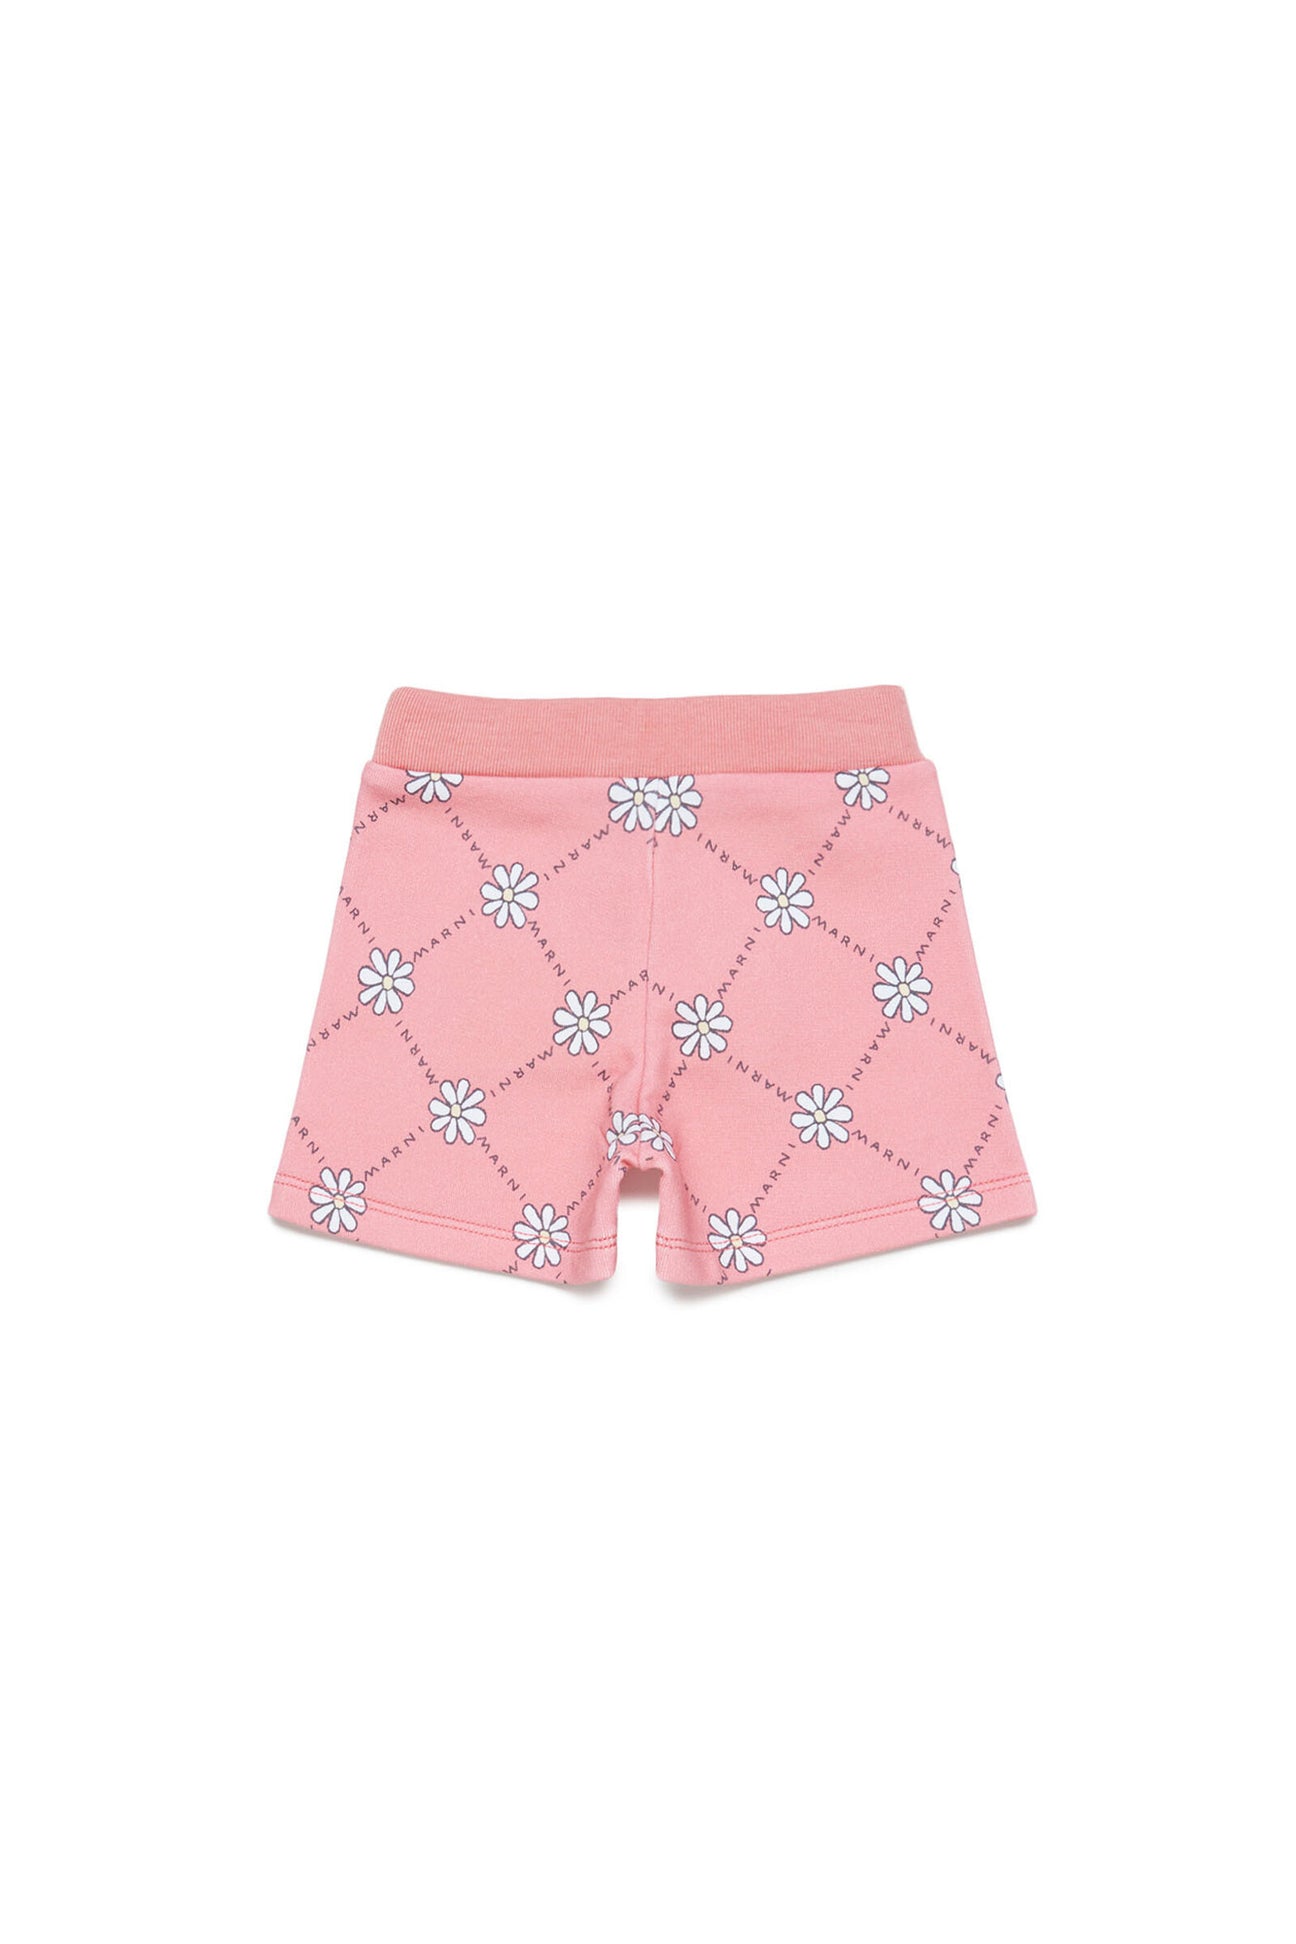 Peach pink cotton shorts with daisy pattern Peach pink cotton shorts with daisy pattern